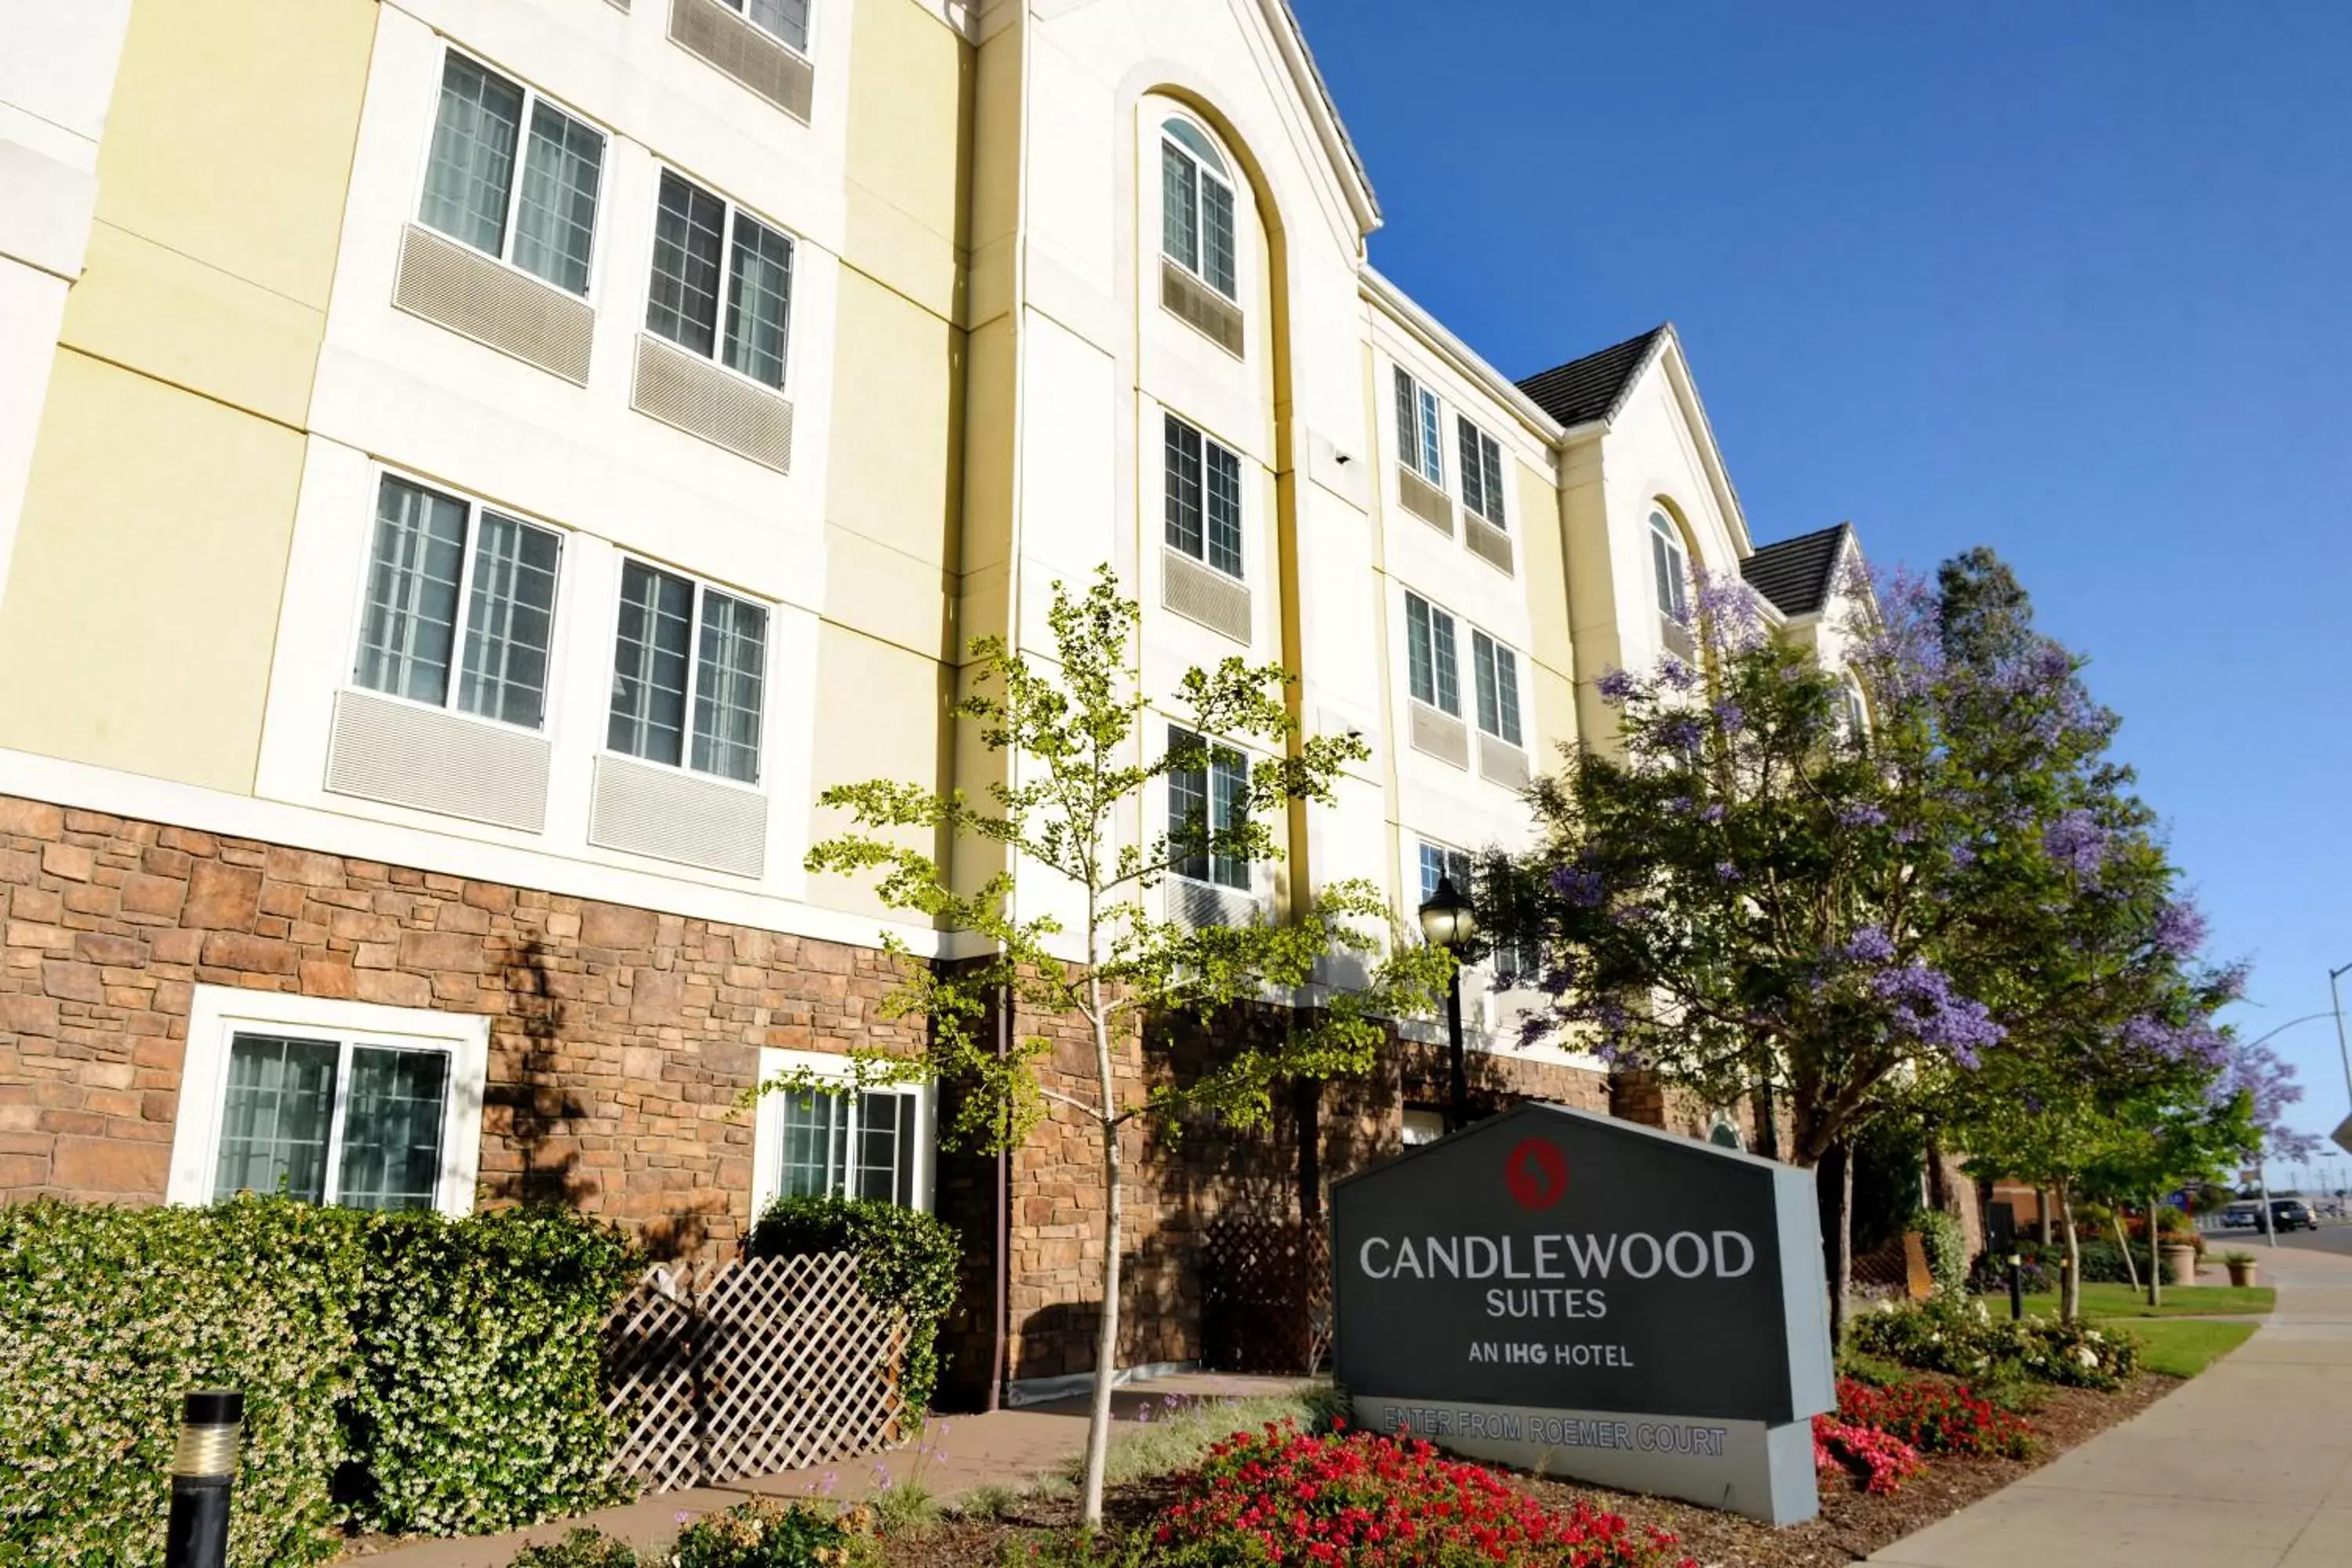 Property building in Candlewood Suites Santa Maria, an IHG Hotel